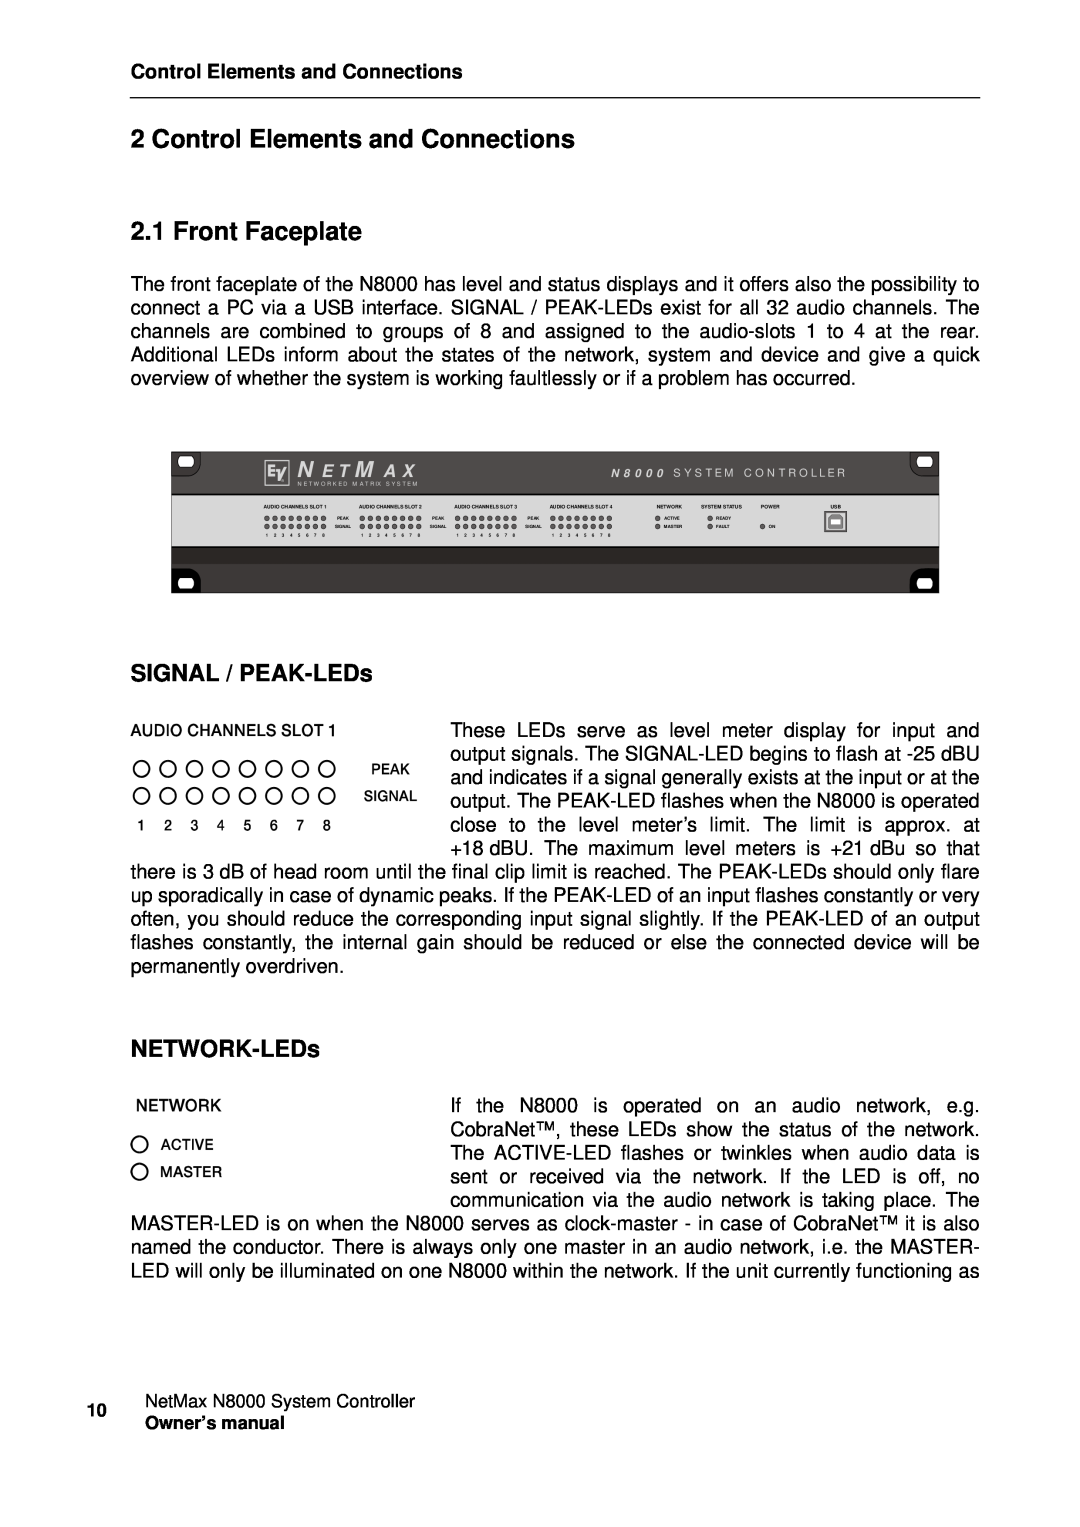 Electro-Voice NetMax N8000 owner manual Control Elements and Connections, Front Faceplate, SIGNAL / PEAK-LEDs, NETWORK-LEDs 